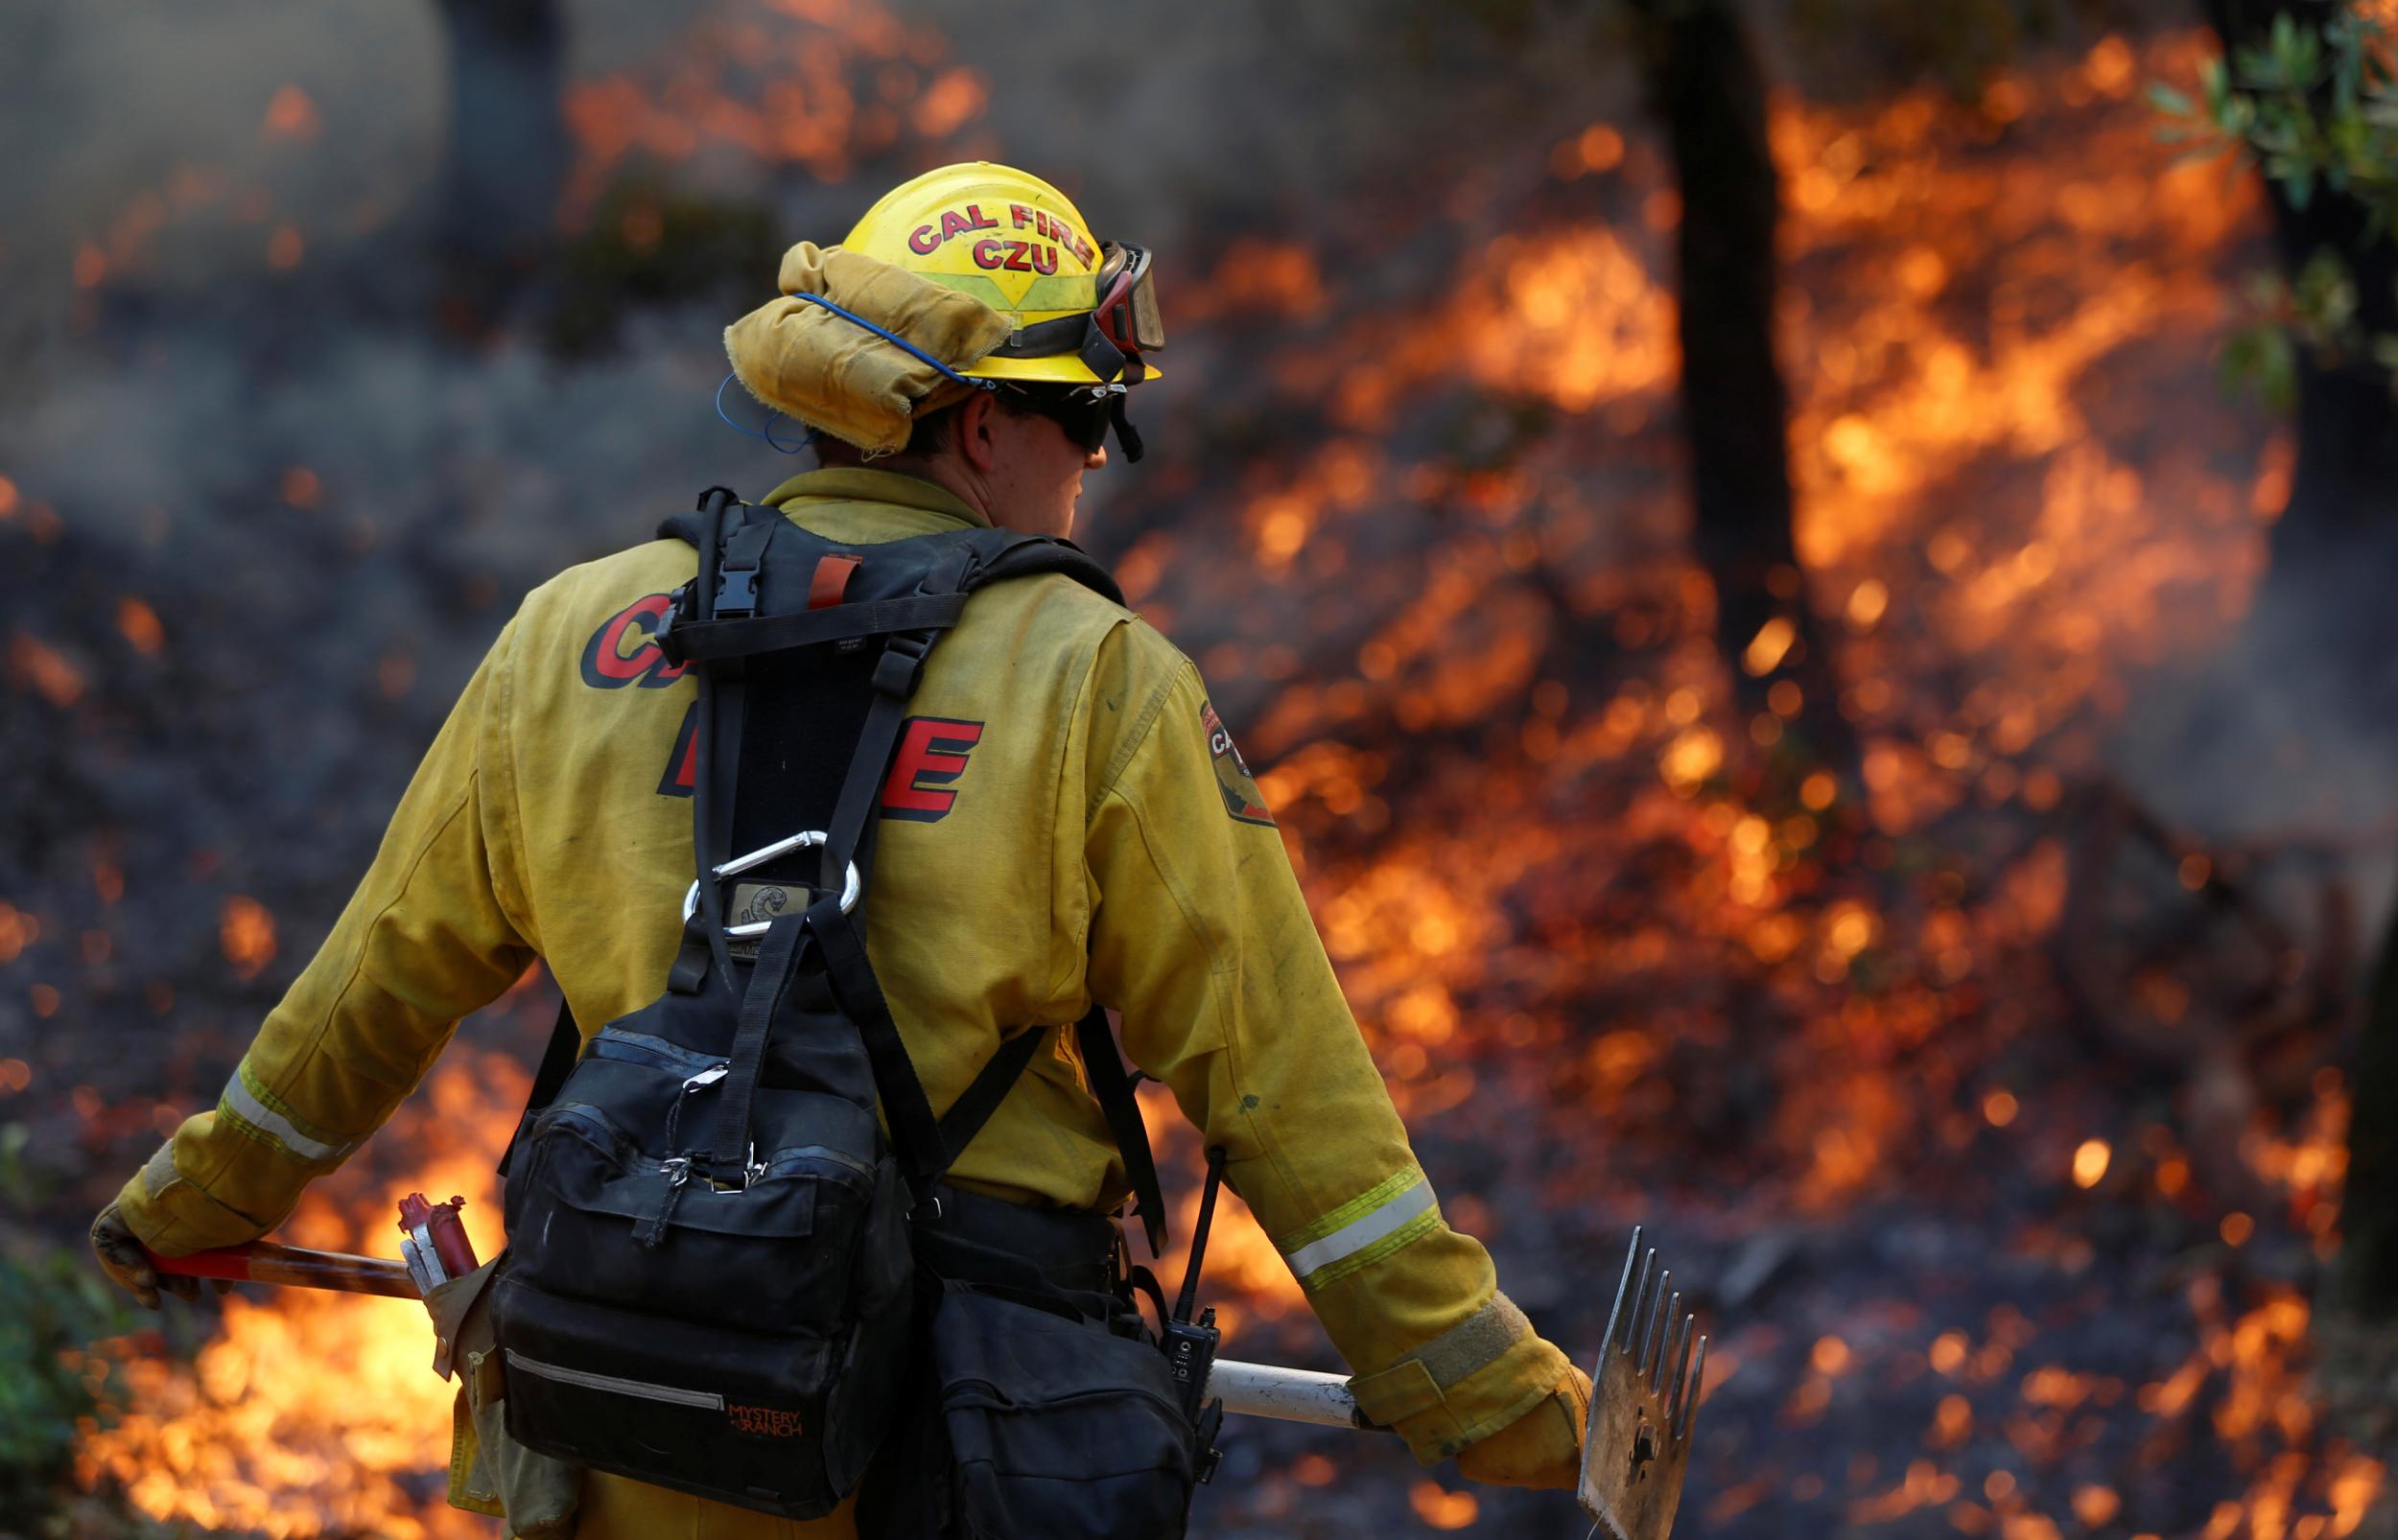 Firefighters work to defend homes from an approaching wildfire in Sonoma, California on 14 October 2017